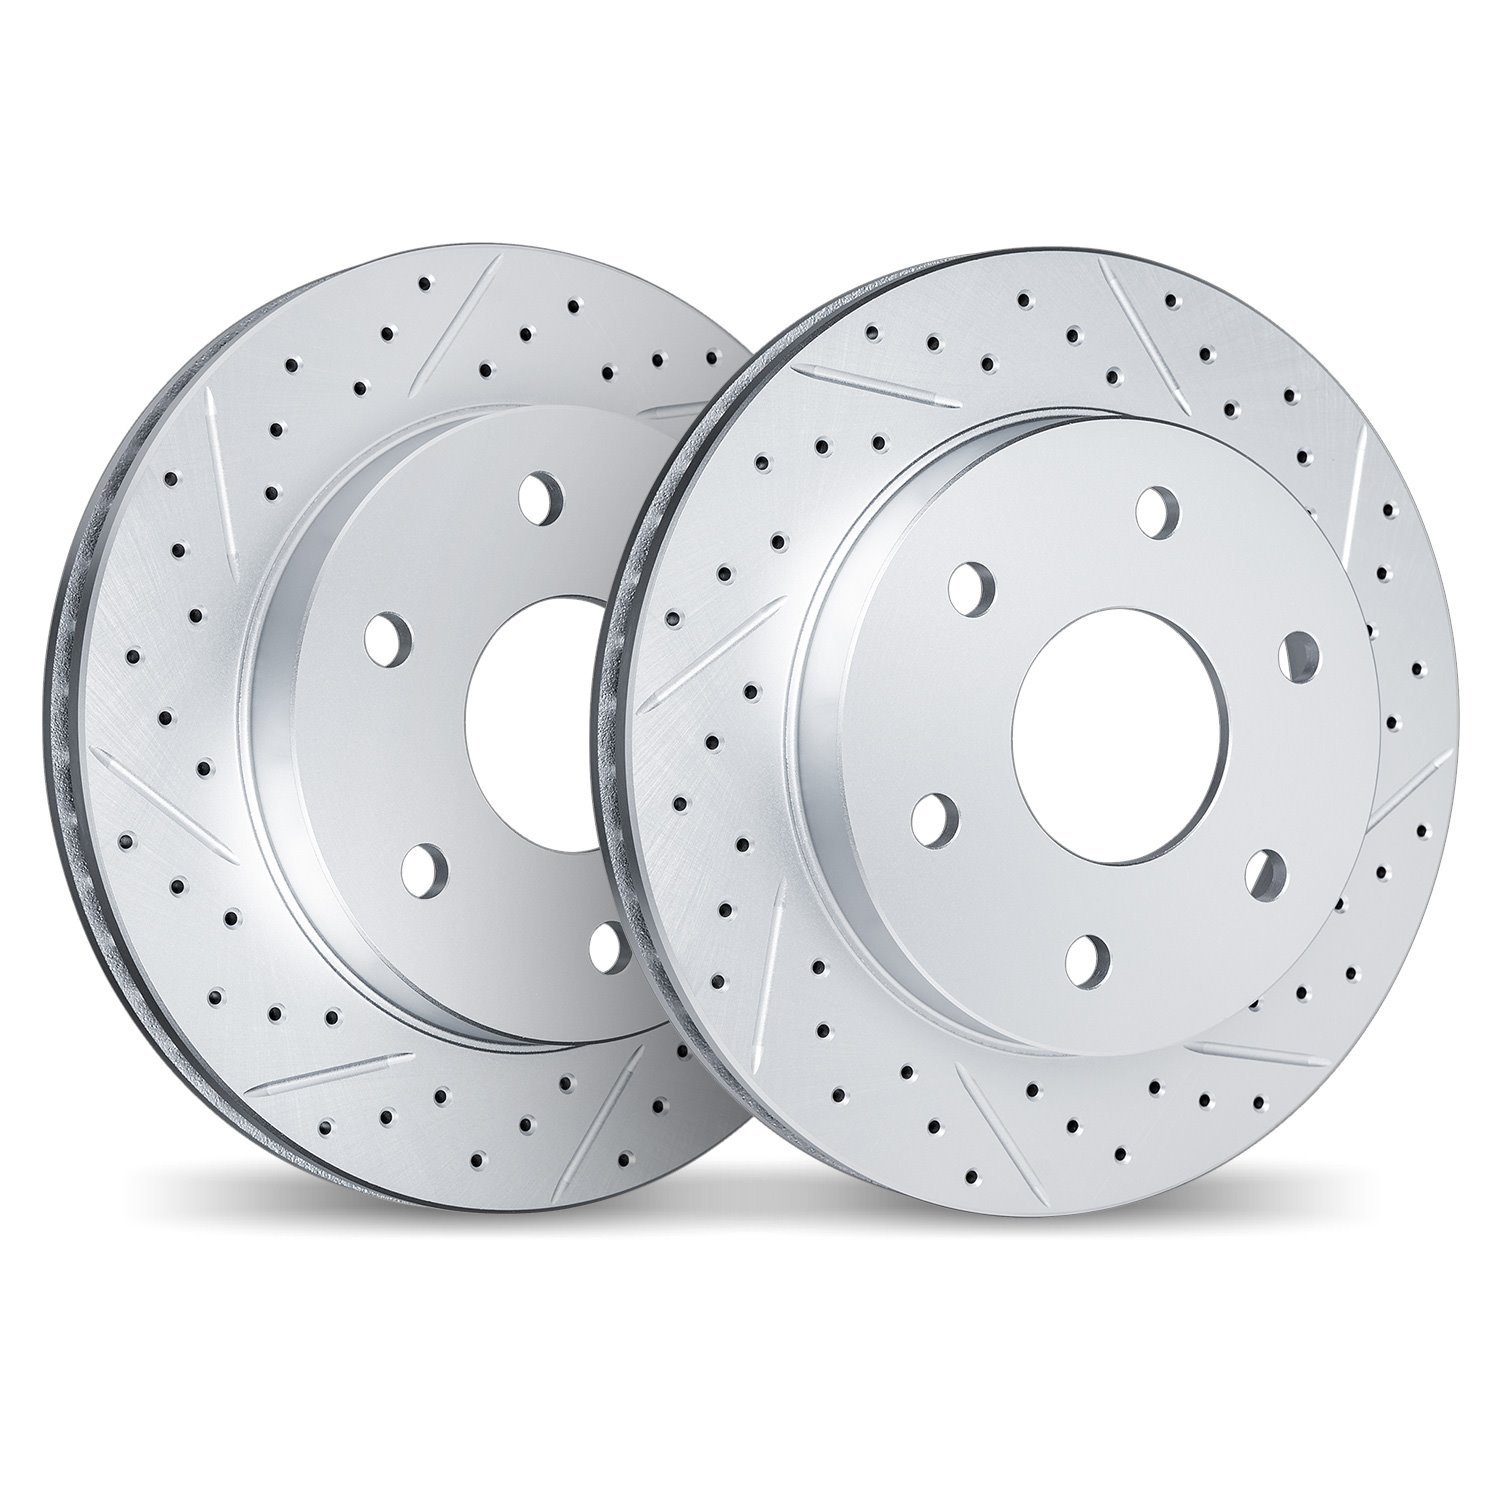 2002-46002 Geoperformance Drilled/Slotted Brake Rotors, Fits Select GM, Position: Front